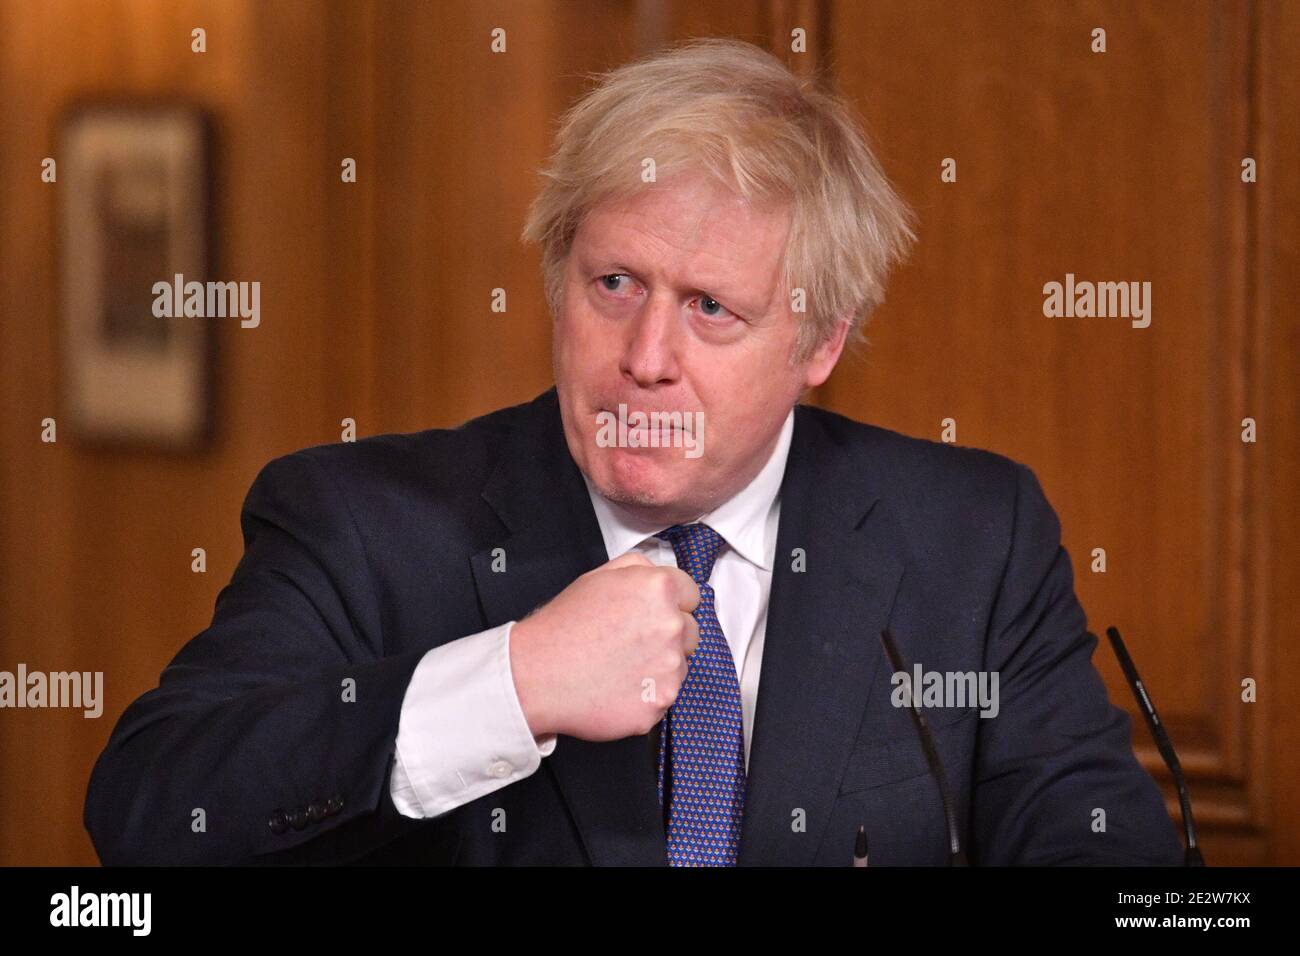 British Prime Minister Boris Johnson gestures at a media briefing on the coronavirus pandemic in Downing Street, London, Britain January 15, 2021. Dominic Lipinski/PA Wire/Pool via REUTERS Stock Photo